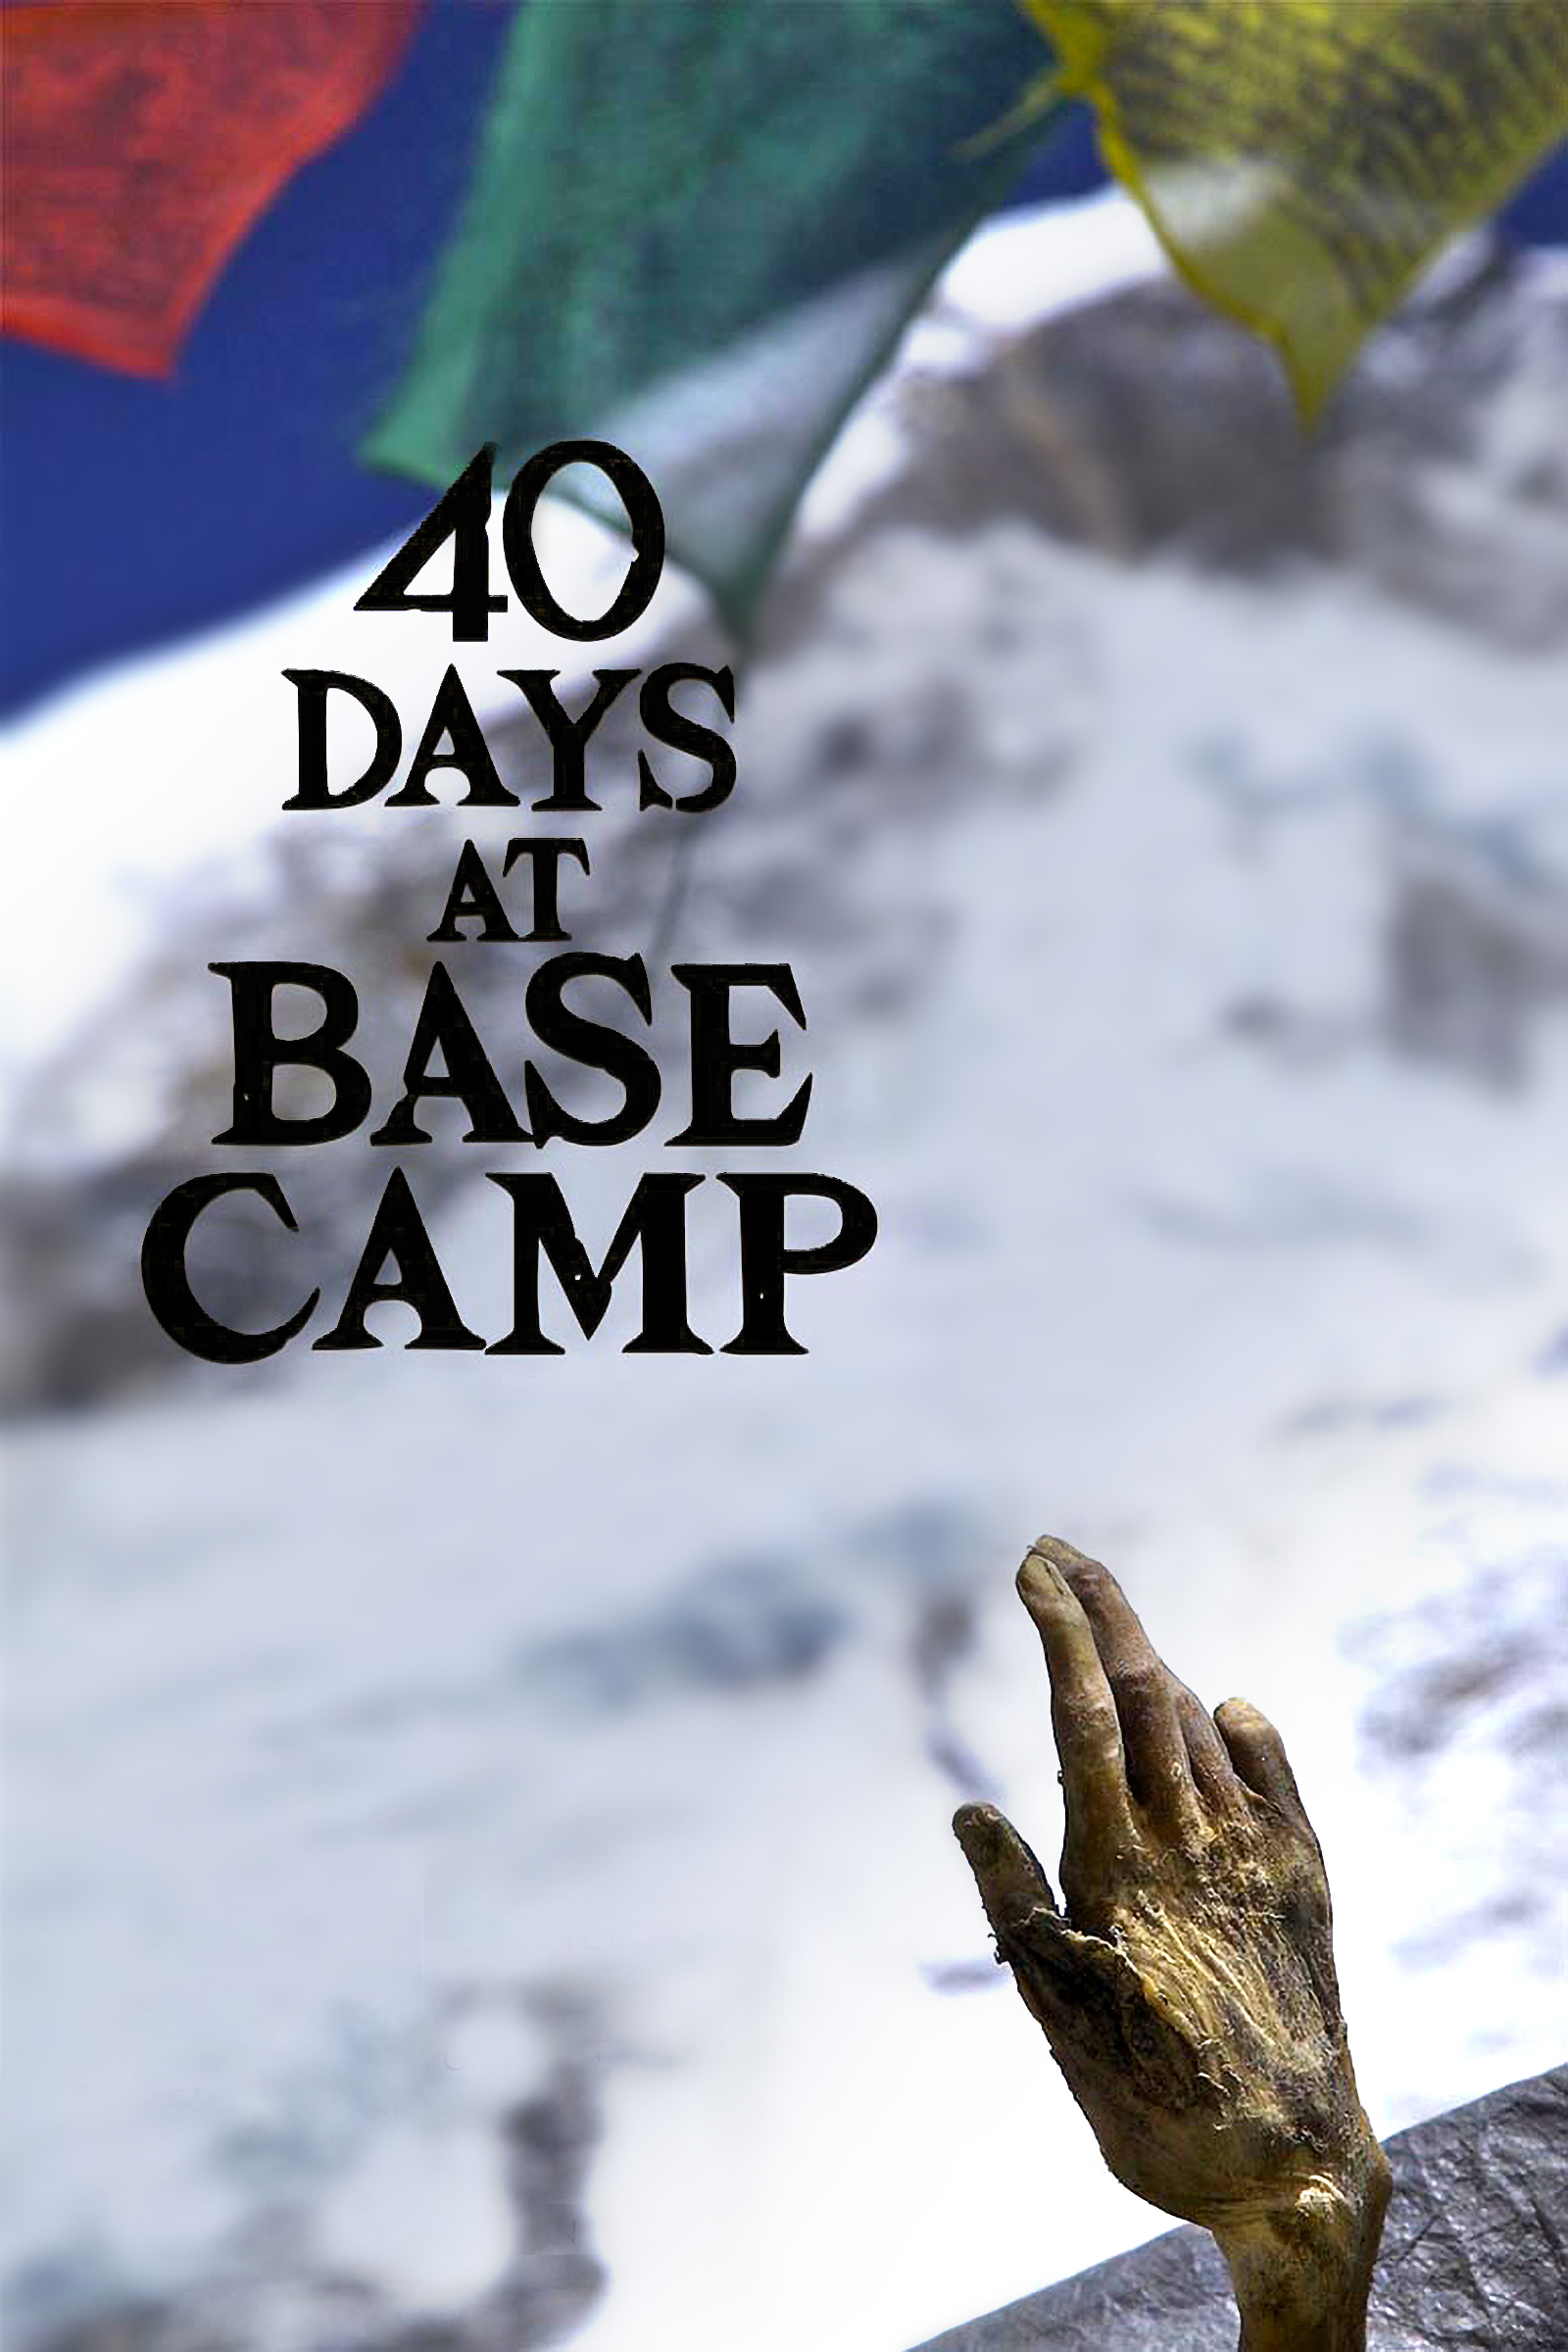 Where to stream 40 Days at Base Camp